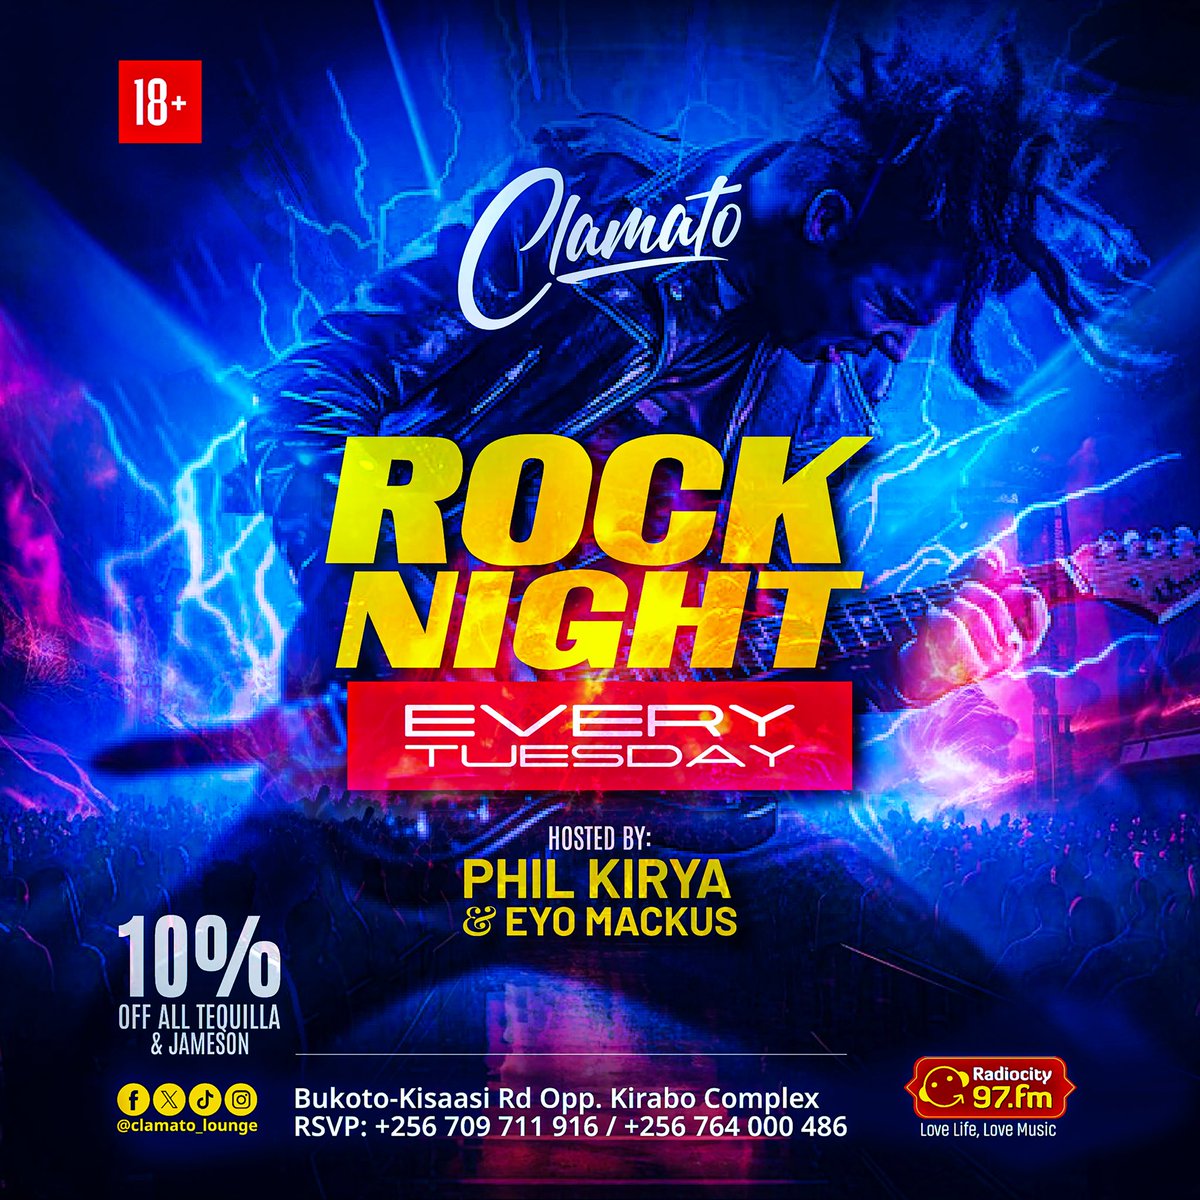 Hello my rock lovers, Rock music has a new every Tuesday with @PhilKirya and @EyoMackus  and that is @clamato_lounge 🎸

Don’t forget a 10% off all tequila and Jameson 

#ClamatoRockTuesdays